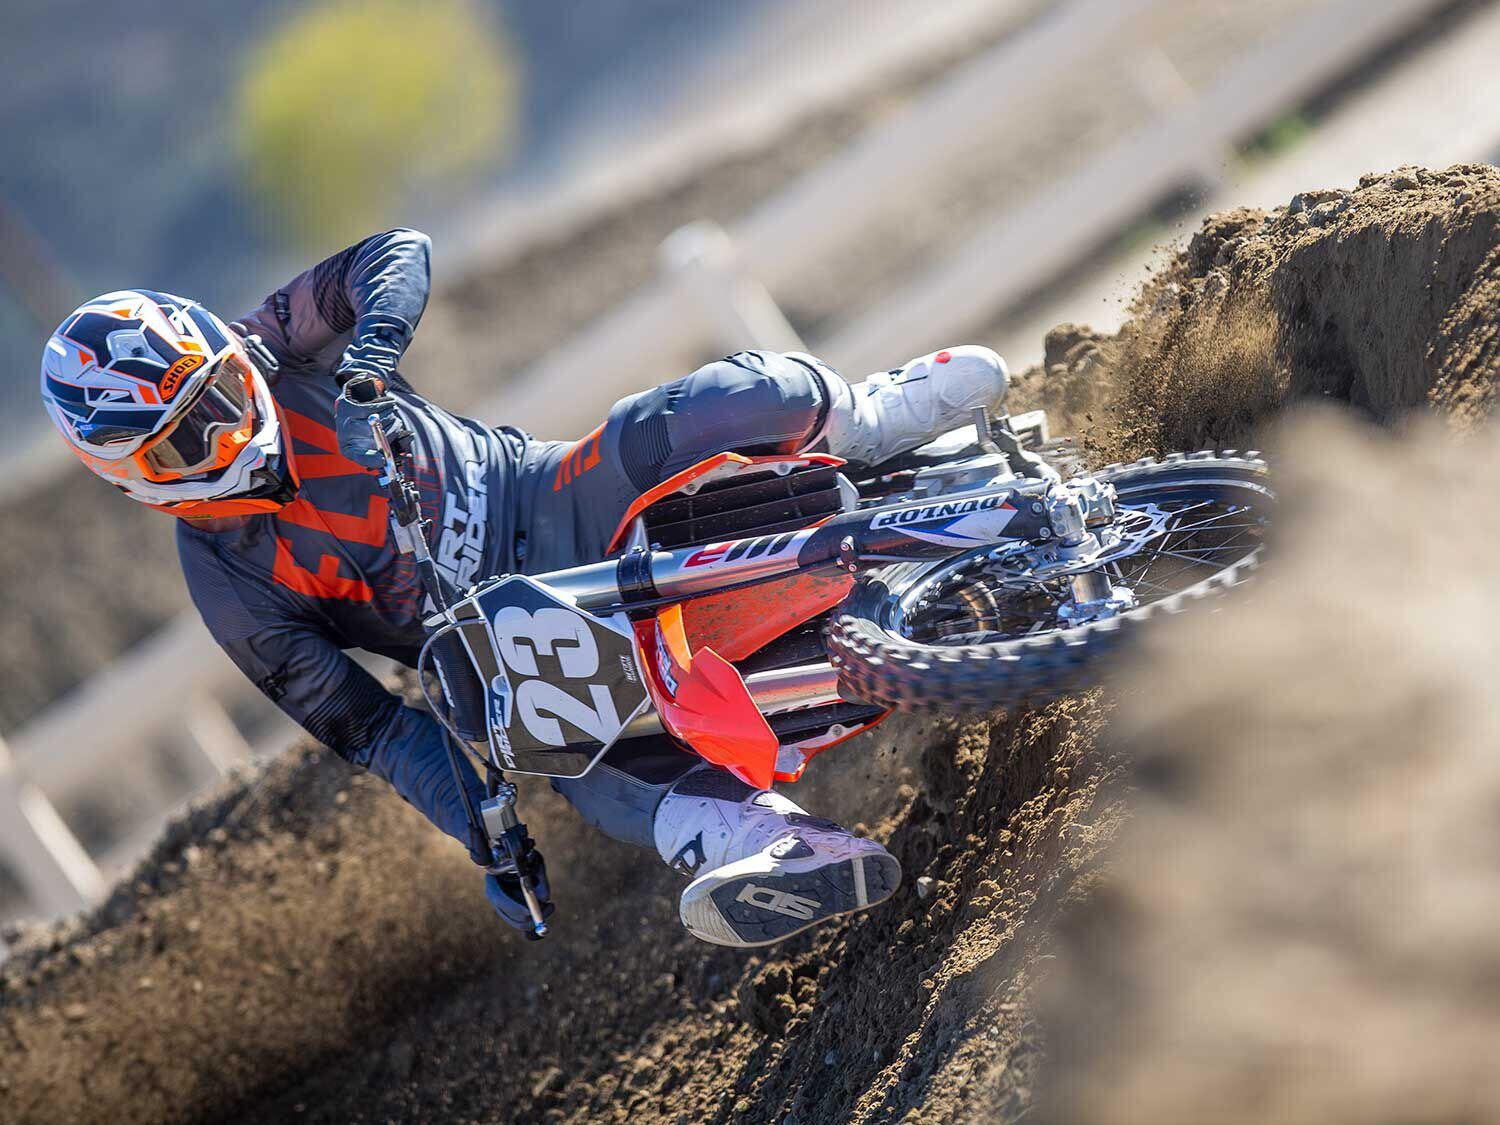 “The KTM chassis feels much more lively than the Husqvarna’s, meaning it takes time for the bike to settle into the corner and rip out. It turns well, and in combination with its easy power delivery, makes for an easy motorcycle to ride. Like the Husqvarna, the KTM has a ton of braking power that quickly brings it to a stop.” <em>—Michael Gilbert</em>